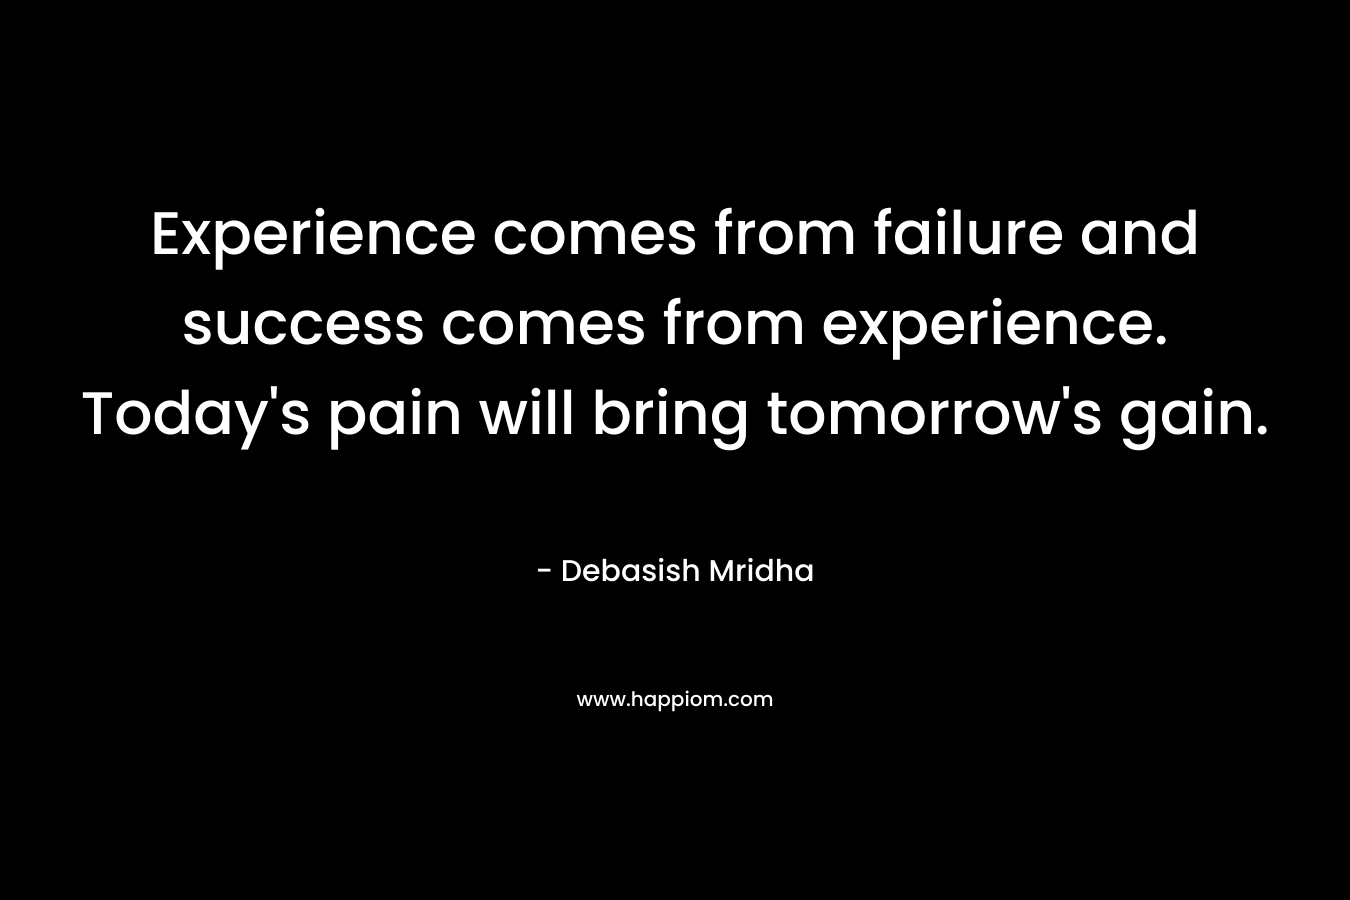 Experience comes from failure and success comes from experience. Today's pain will bring tomorrow's gain.